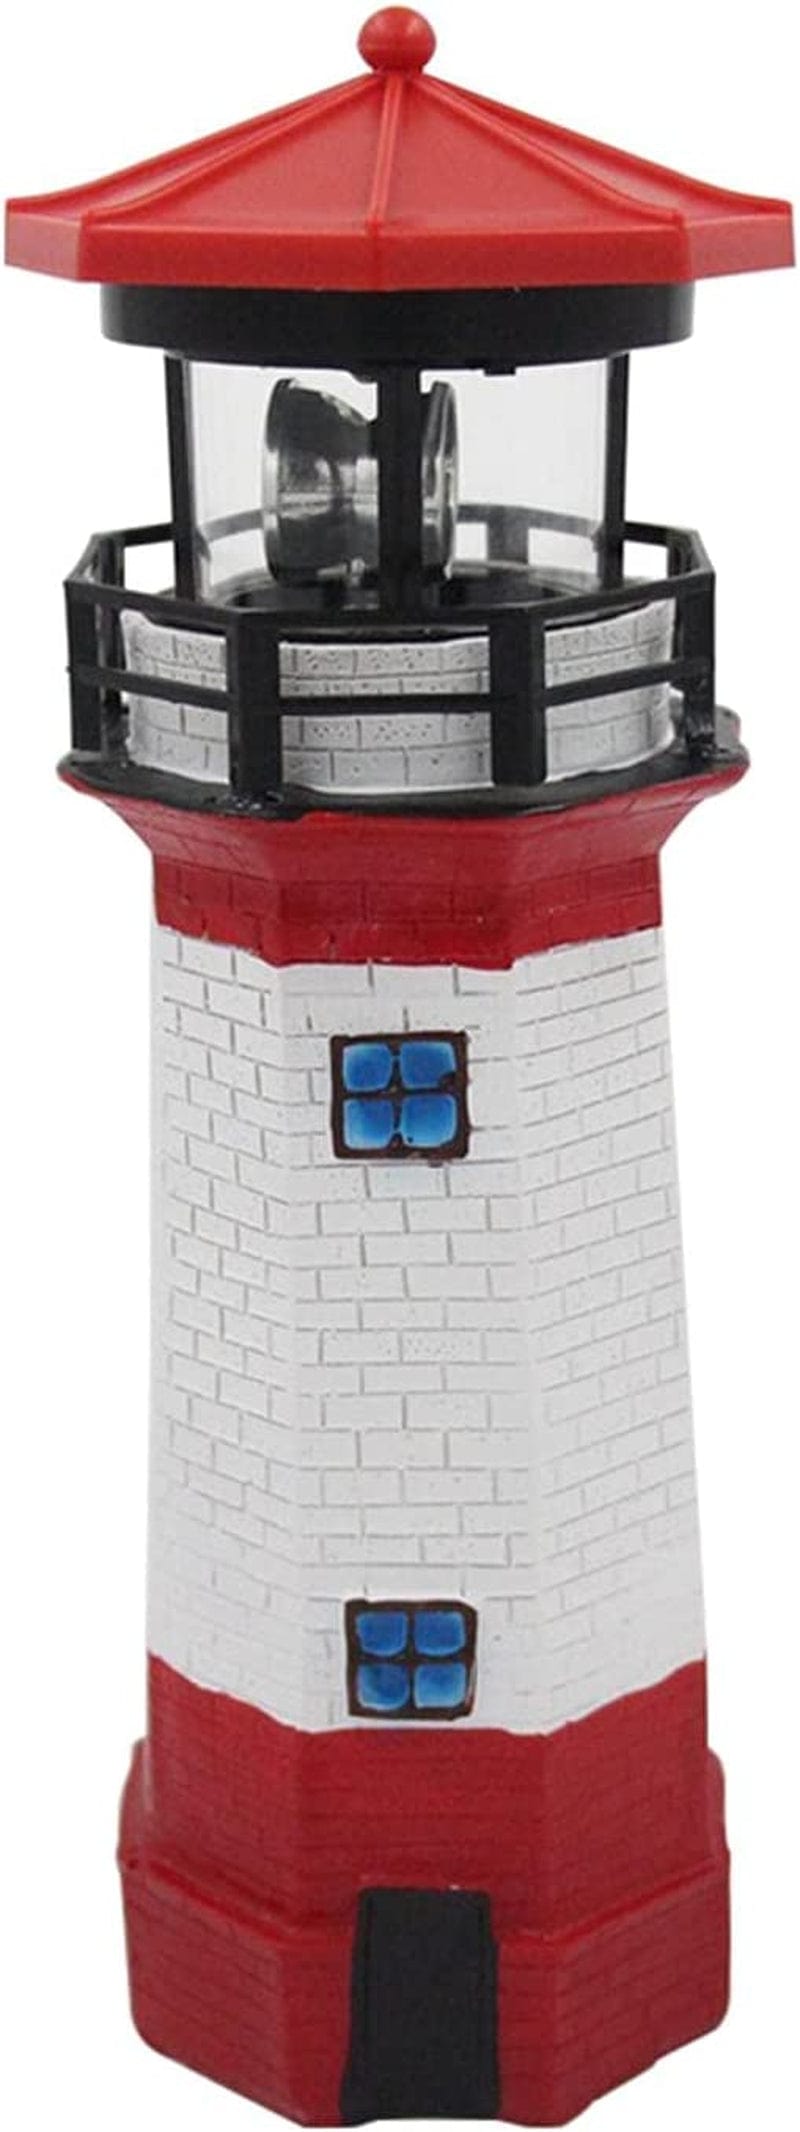 GEZICHTA Solar Lighthouse Garden Statue with Rotating Lamp, 27Cm Resin Solar Lighthouse Sculpture Waterproof Garden Ornaments Outdoor LED Waterproof Solar Led Lamp for Yard Lawn Patio(Red), Free Size Home & Garden > Lighting > Lamps GEZICHTA   